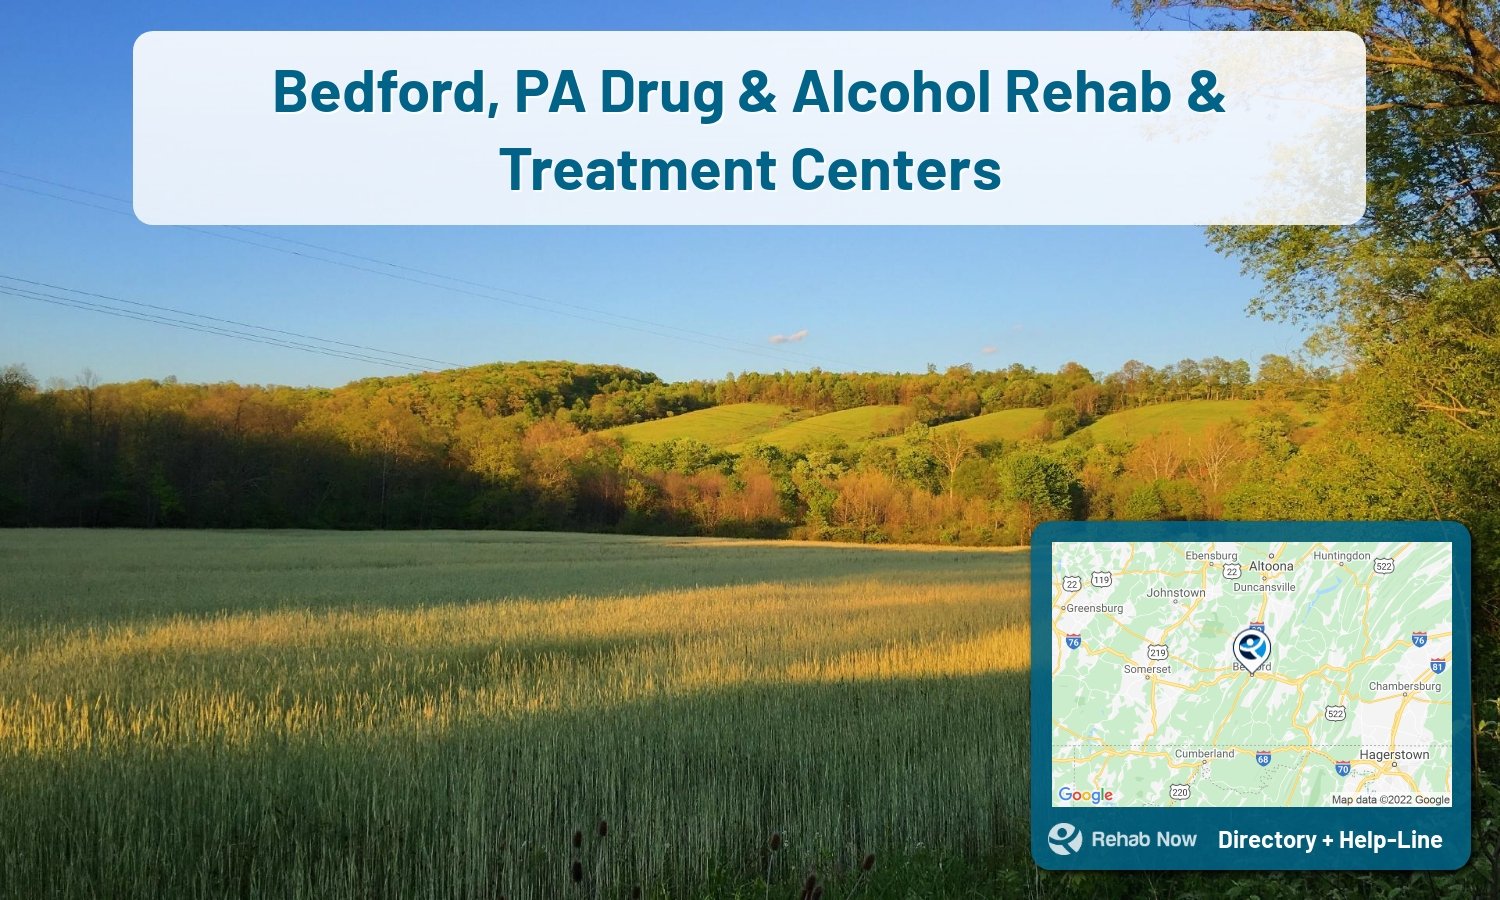 Bedford, PA Treatment Centers. Find drug rehab in Bedford, Pennsylvania, or detox and treatment programs. Get the right help now!